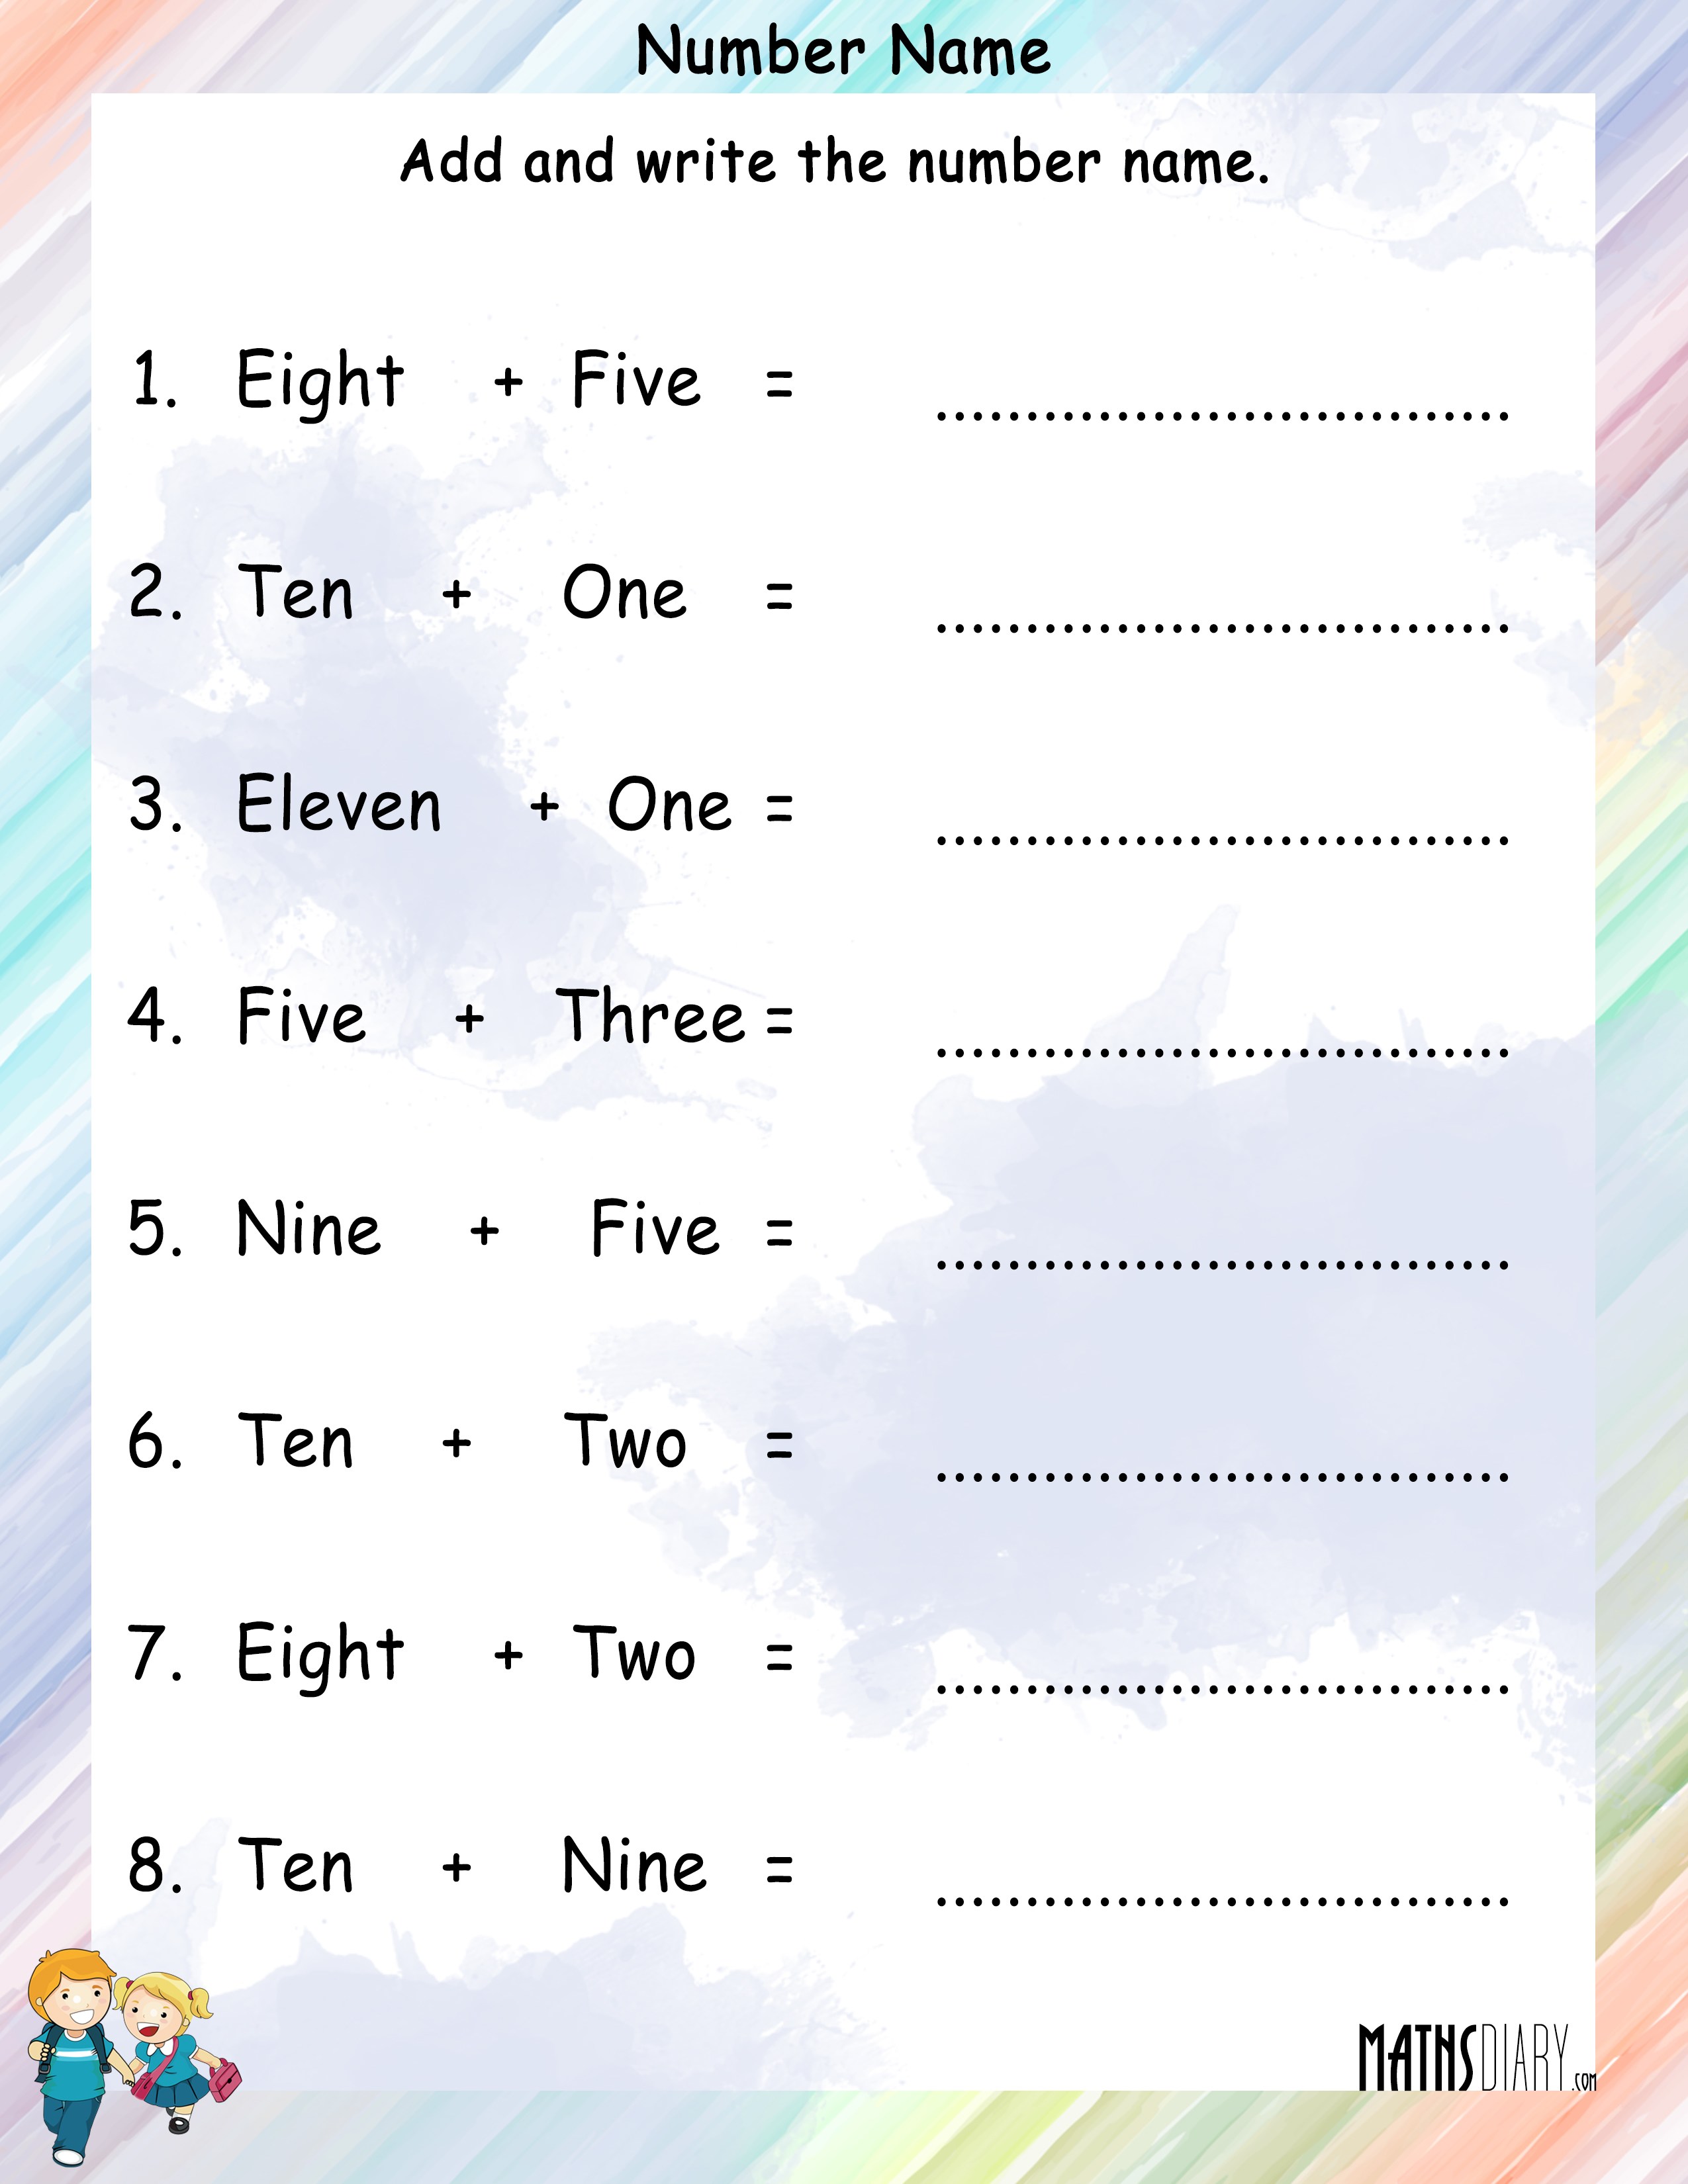 add-the-number-names-and-write-answer-in-number-name-math-worksheets